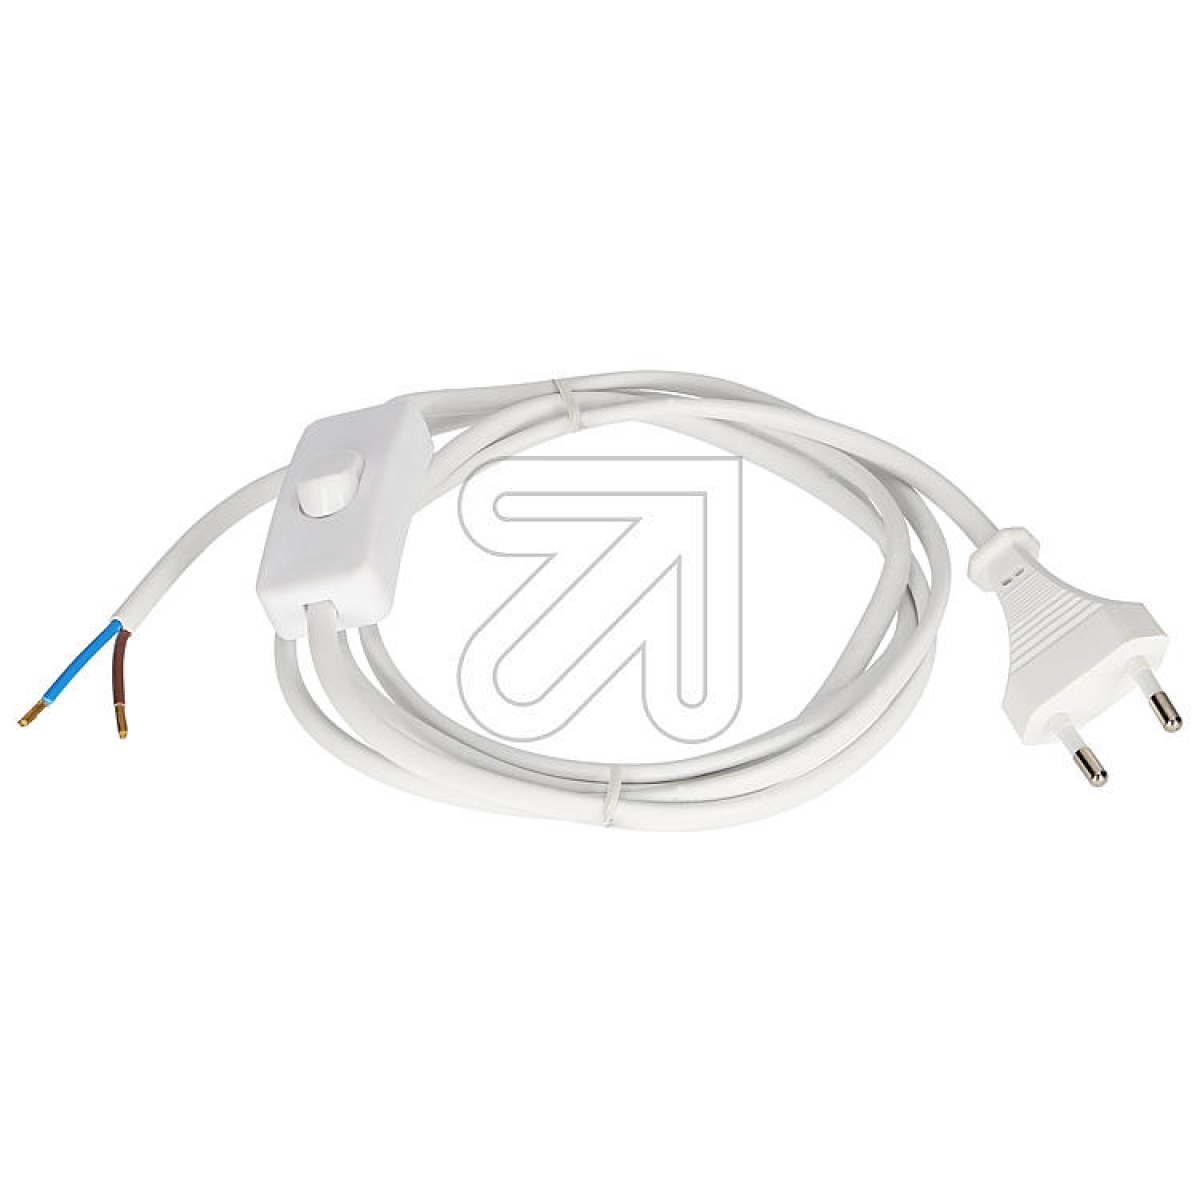 EGBEuro connection cable with switch white 1.8m-Price for 5 pcs.Article-No: 022910